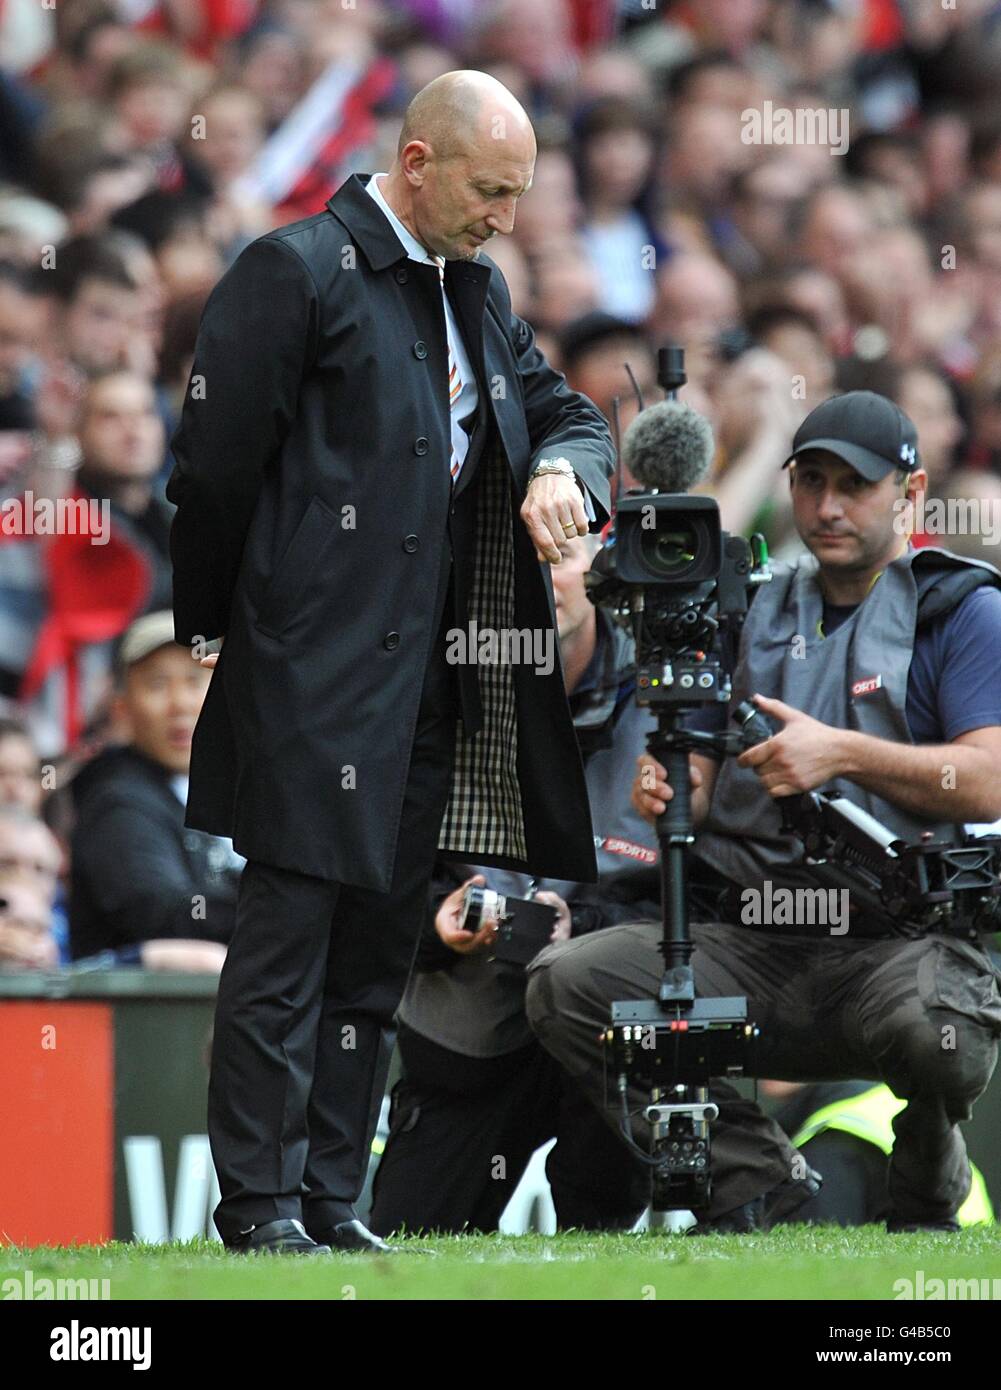 Soccer - Barclays Premier League - Manchester United v Blackpool - Old Trafford. Blackpool manager Ian Holloway checks his watch towards the end of the match Stock Photo